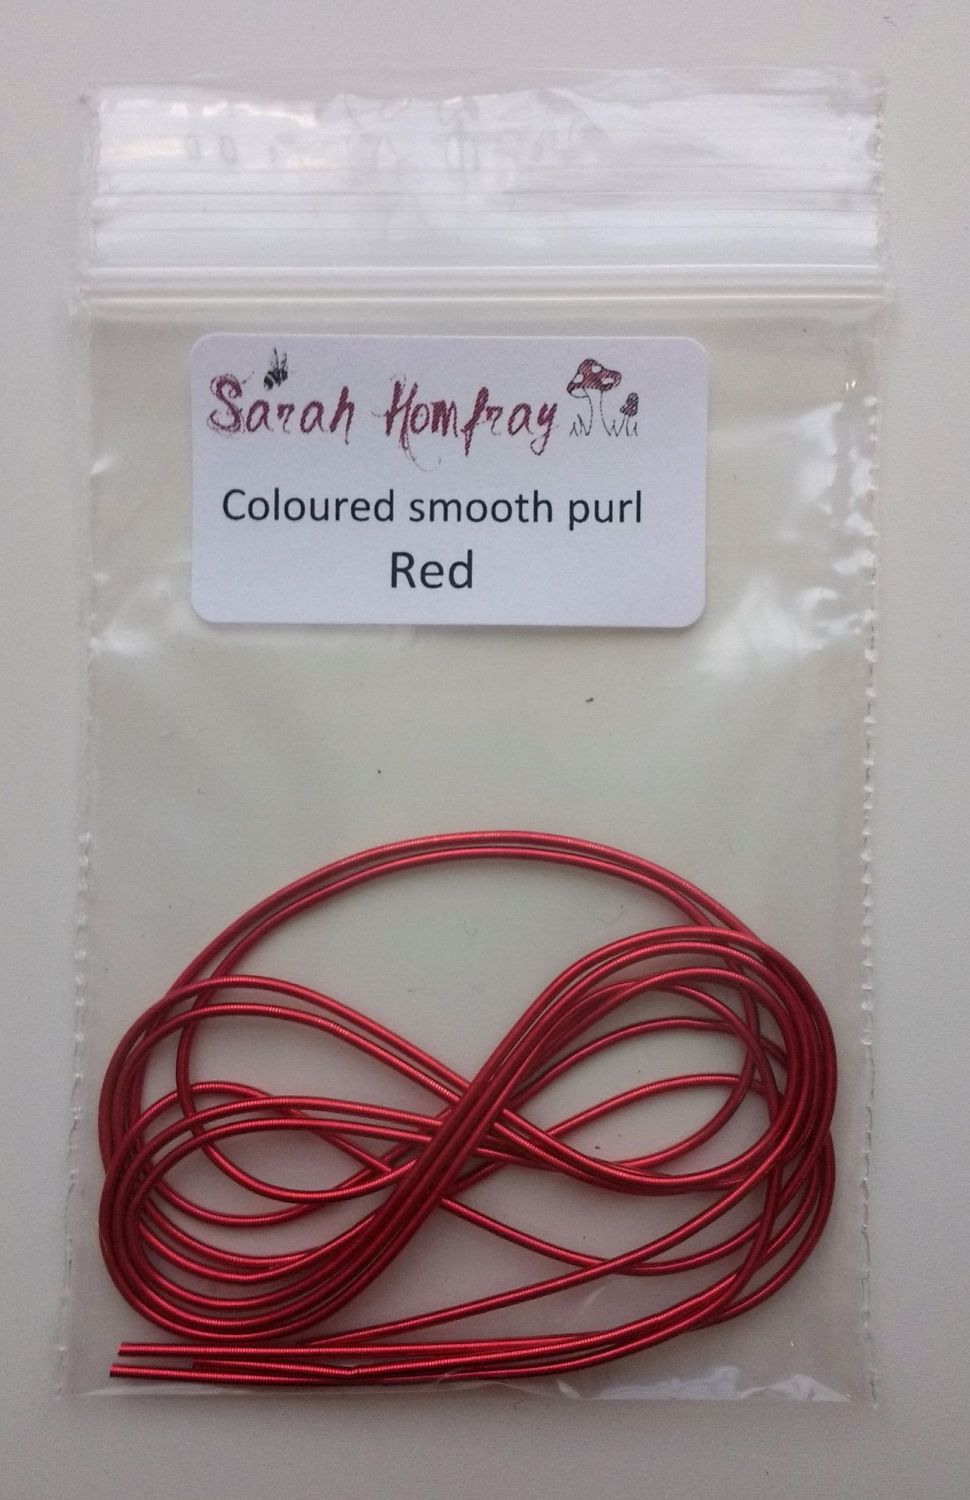 NEW! Coloured smooth purl no.6 - Red